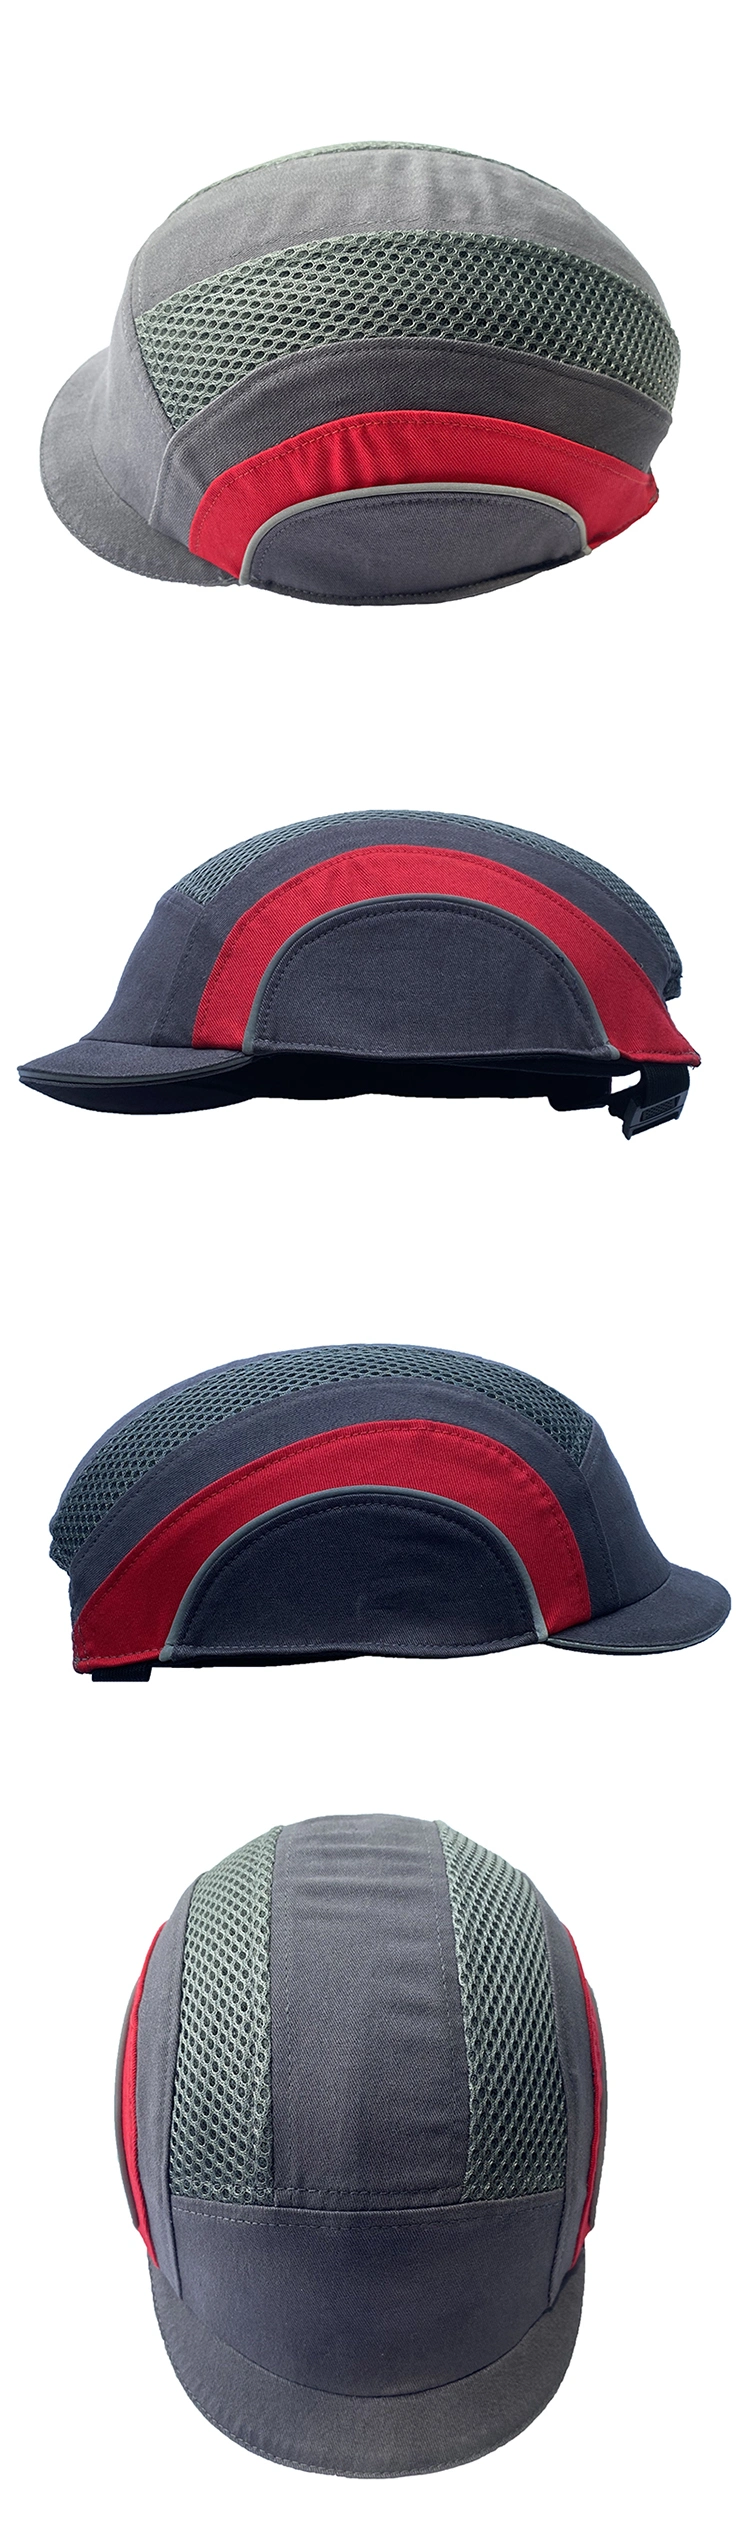 Wholesale Outdoor Custom Embroidery Printed Logo Mesh Hard Hat Sports Reflective Safety Bump Cap Helmet Cycling Caps